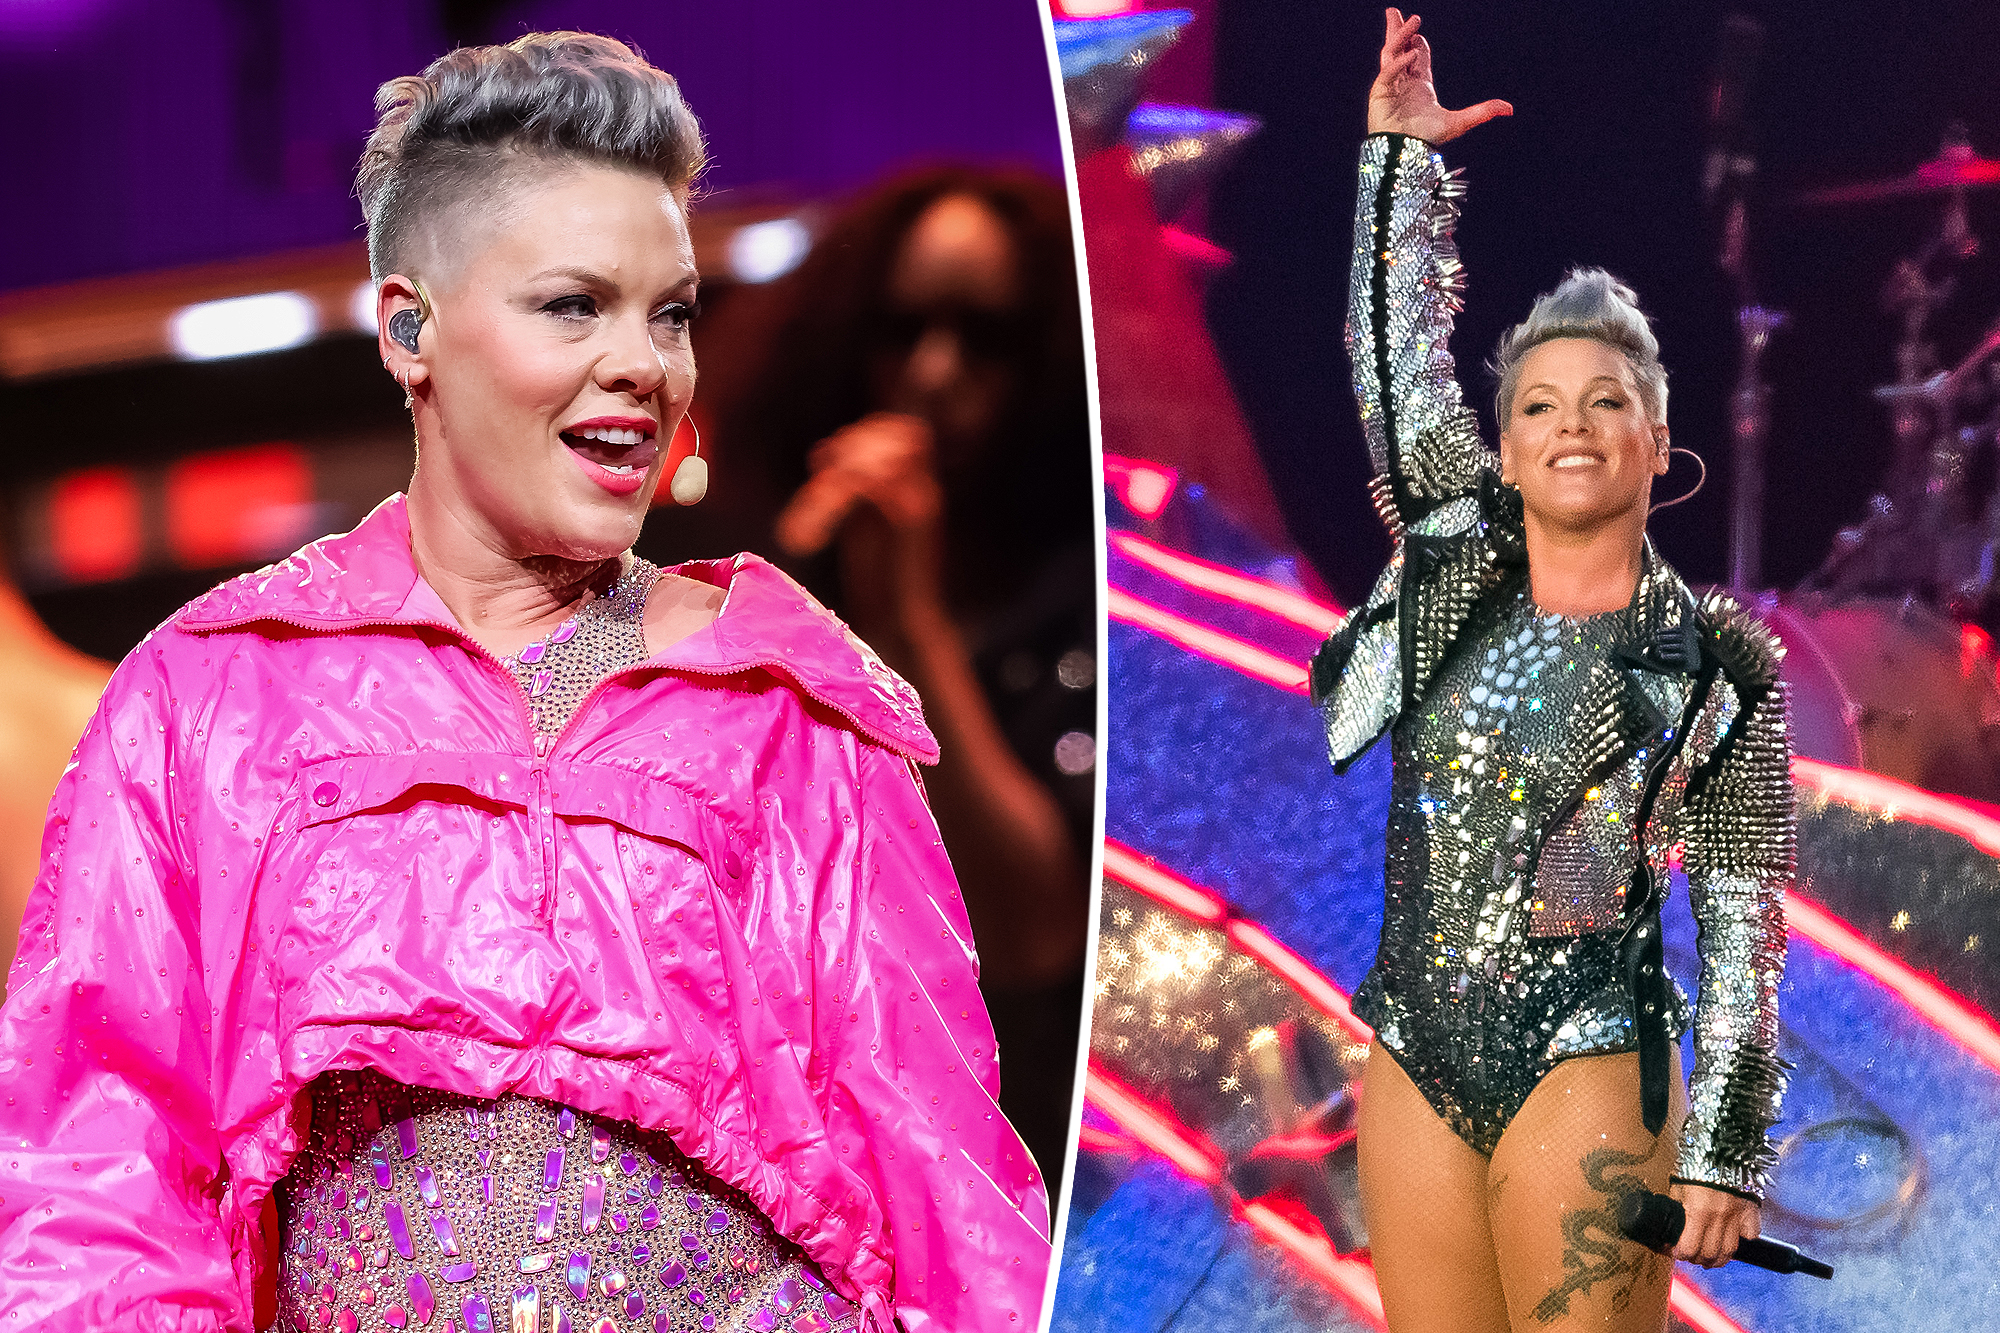 Pink's Concert Cancellation Sparks Concern: What's Behind the Mystery Illness?